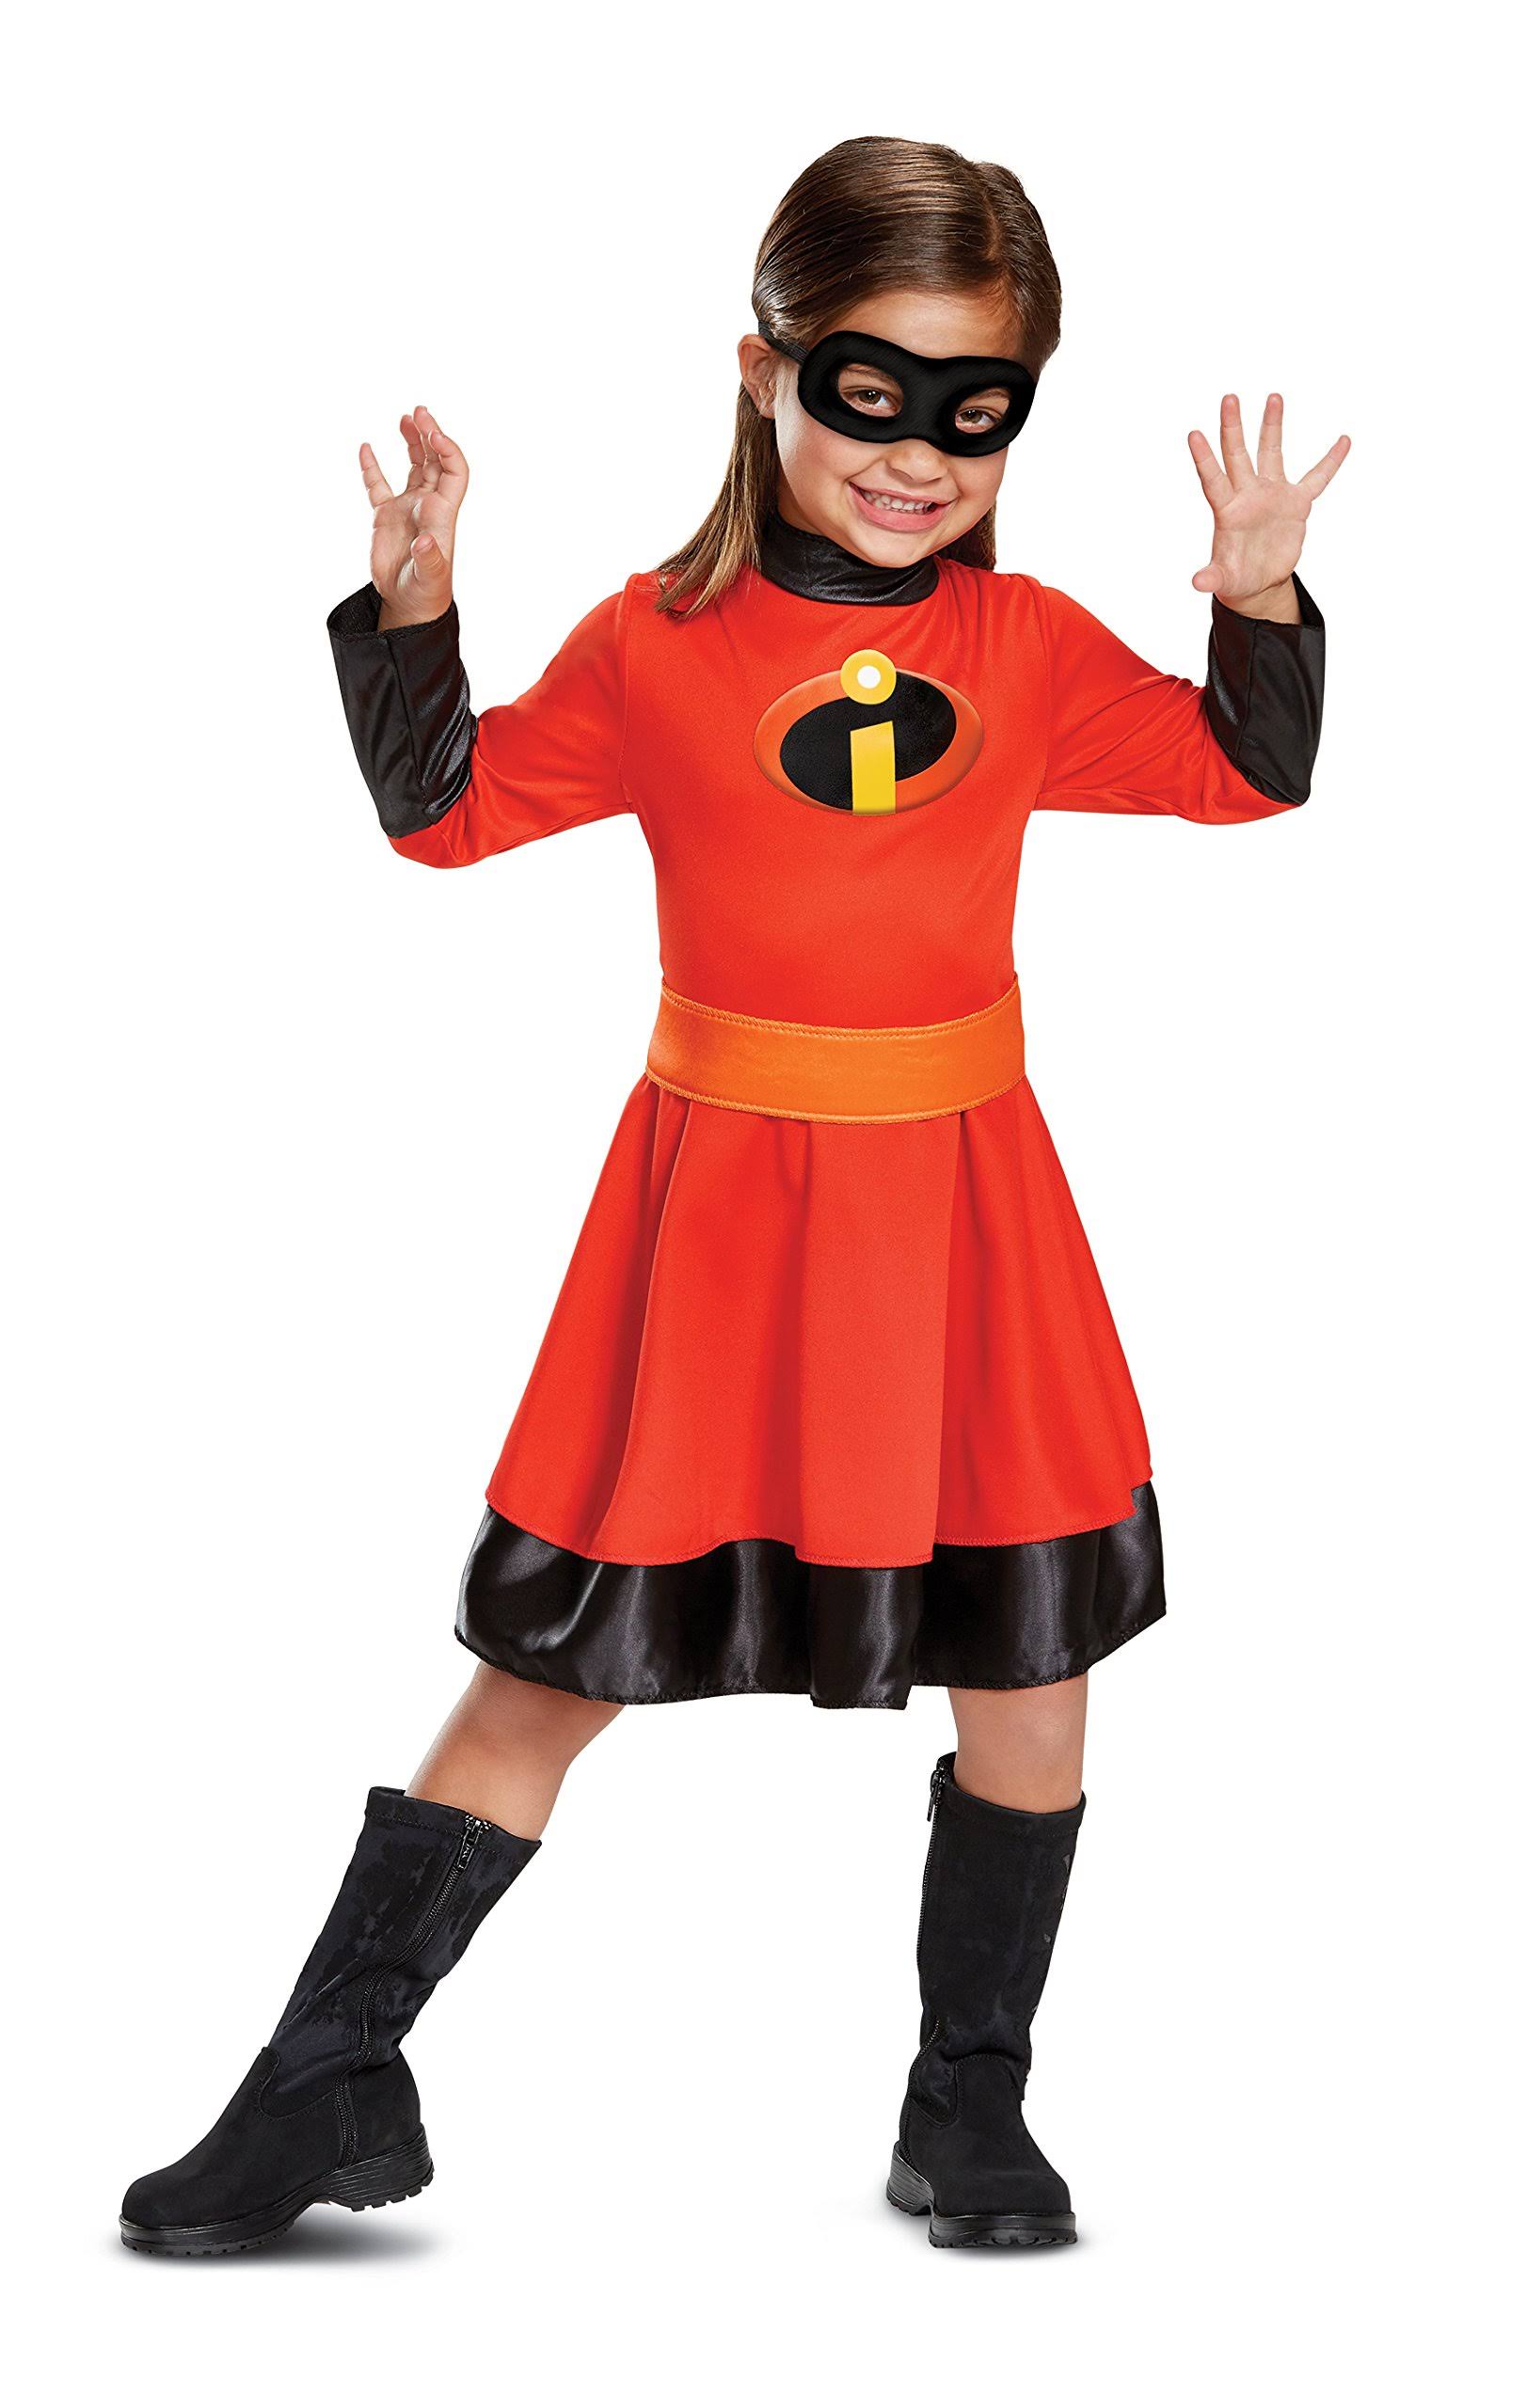 Disguise Incredibles 2 Violet Classic Toddler Costume, Red/Black, Size 3T-4T